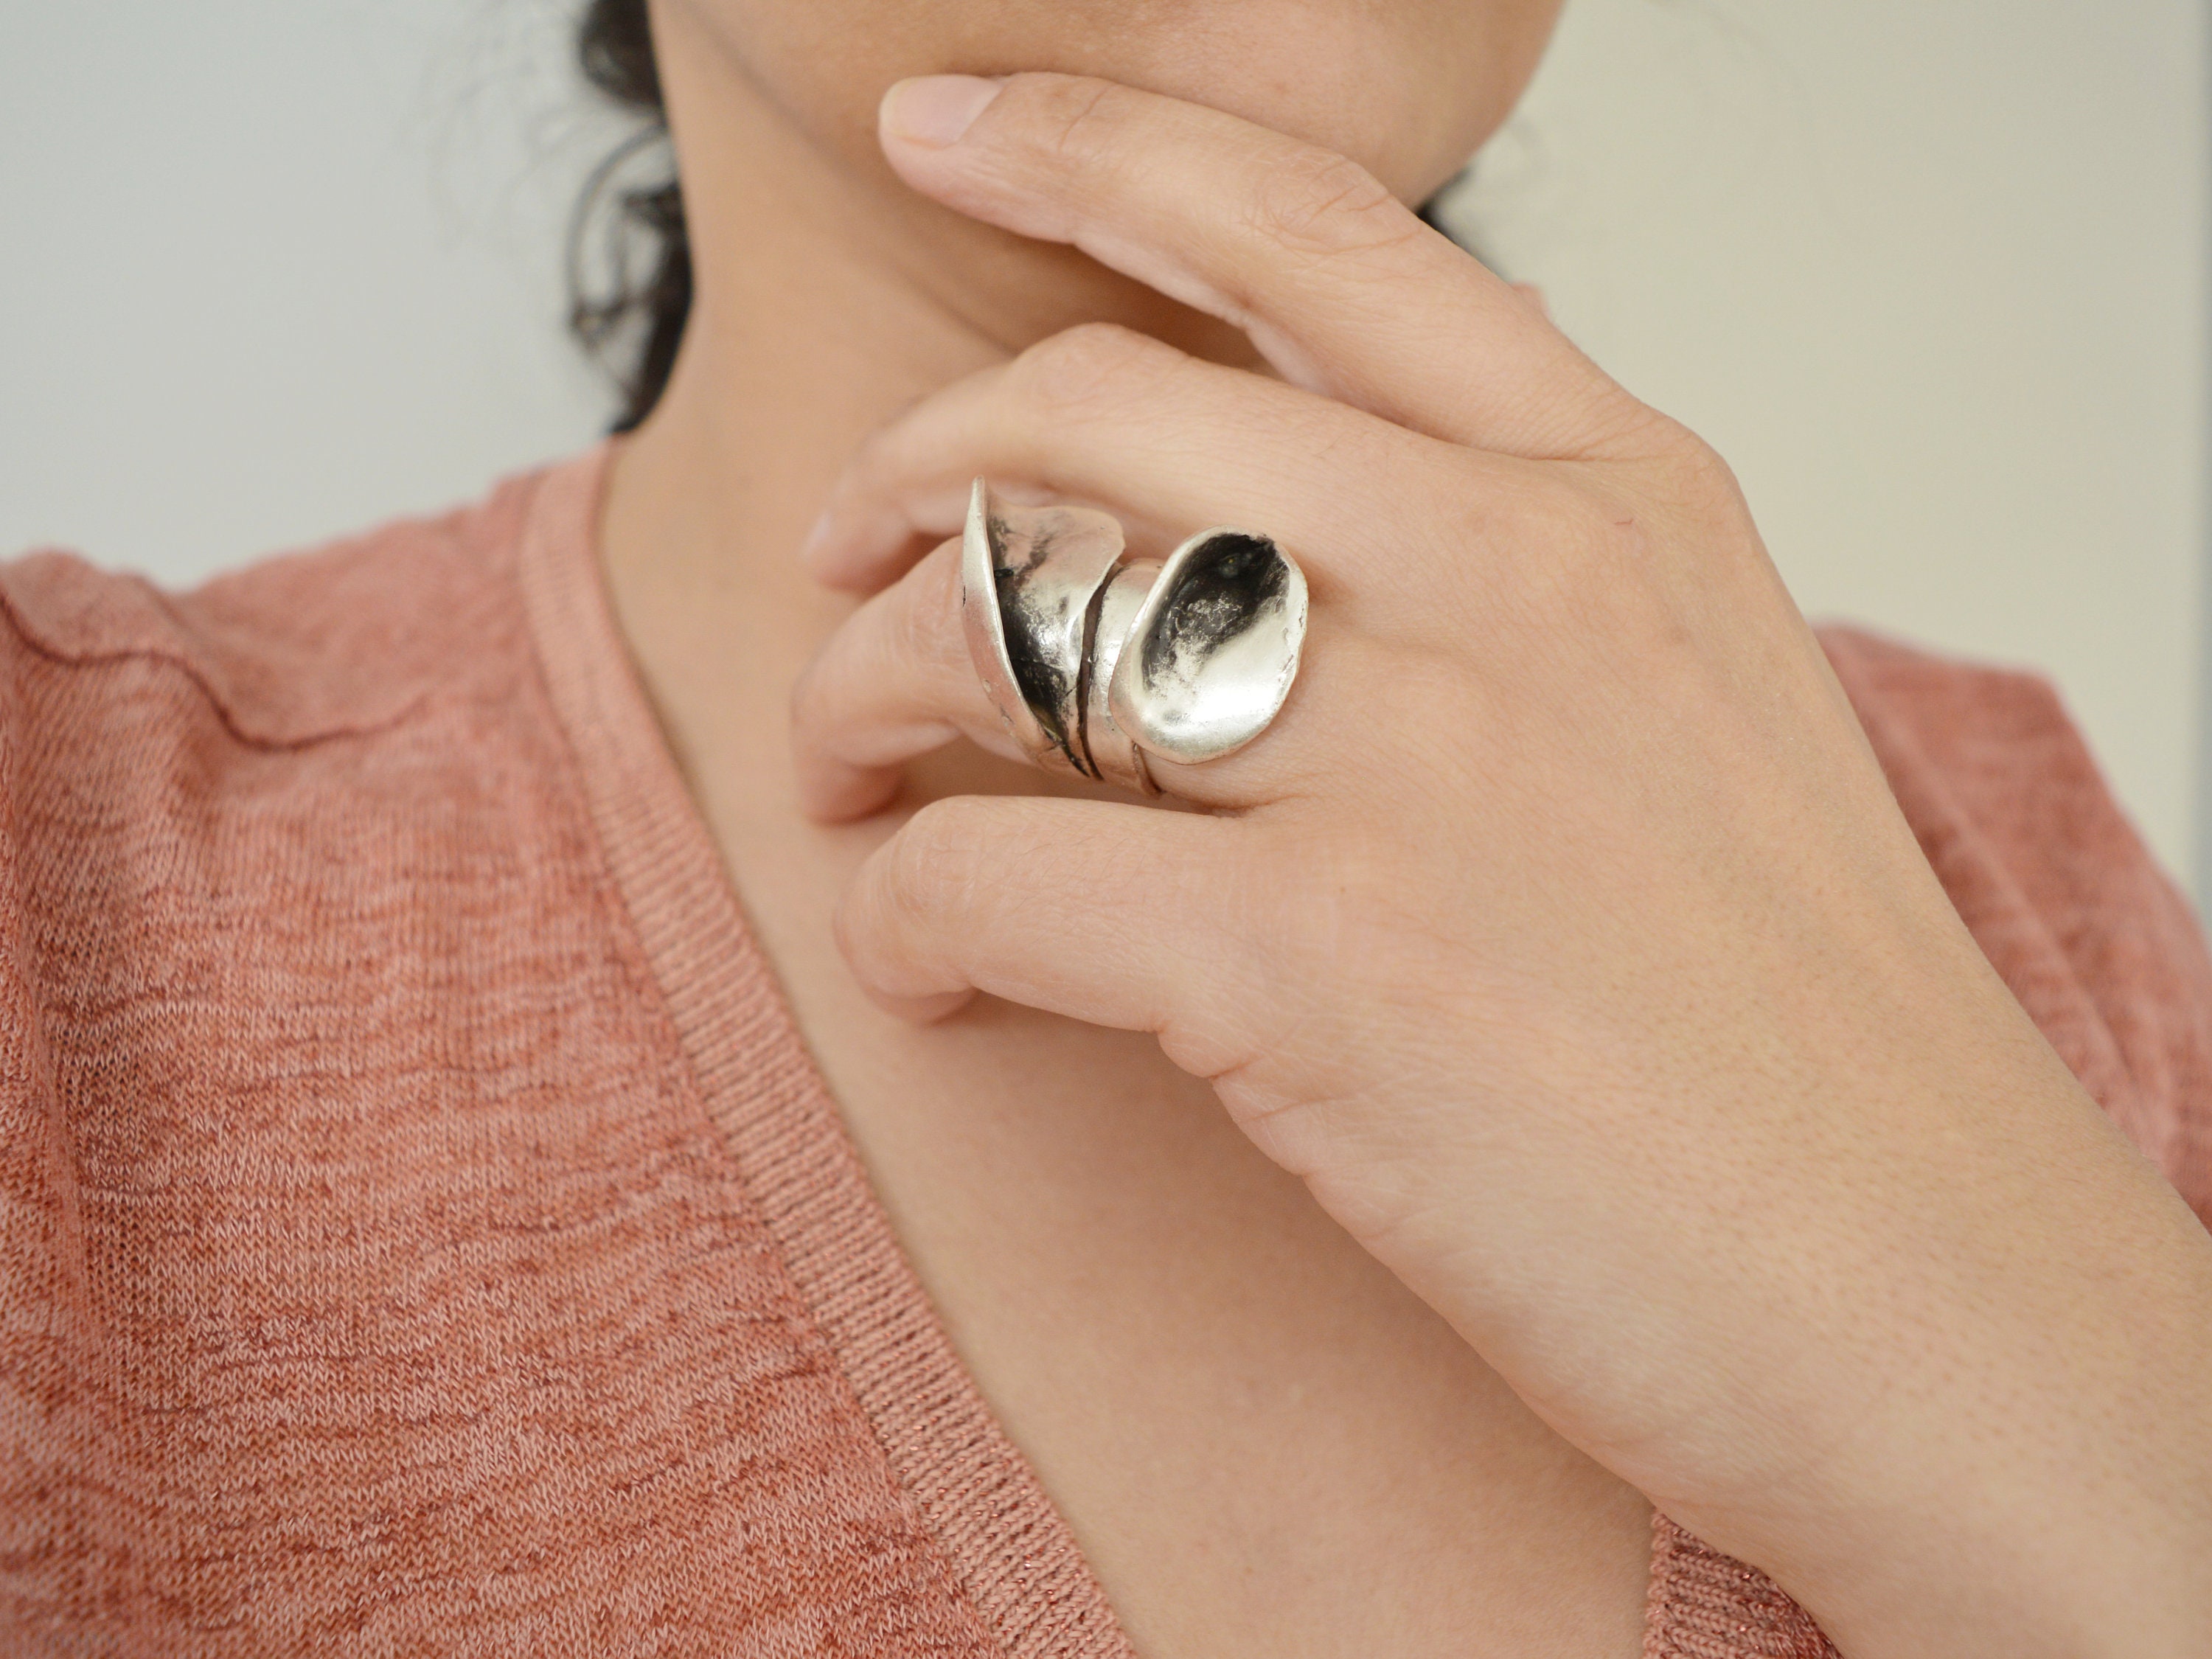 Statement Ring Handmade Boho Ring Full Finger Ring Stainless Steel Ring  Hammered Long Ring Tube Ring Wide Silver Cuff Ring 